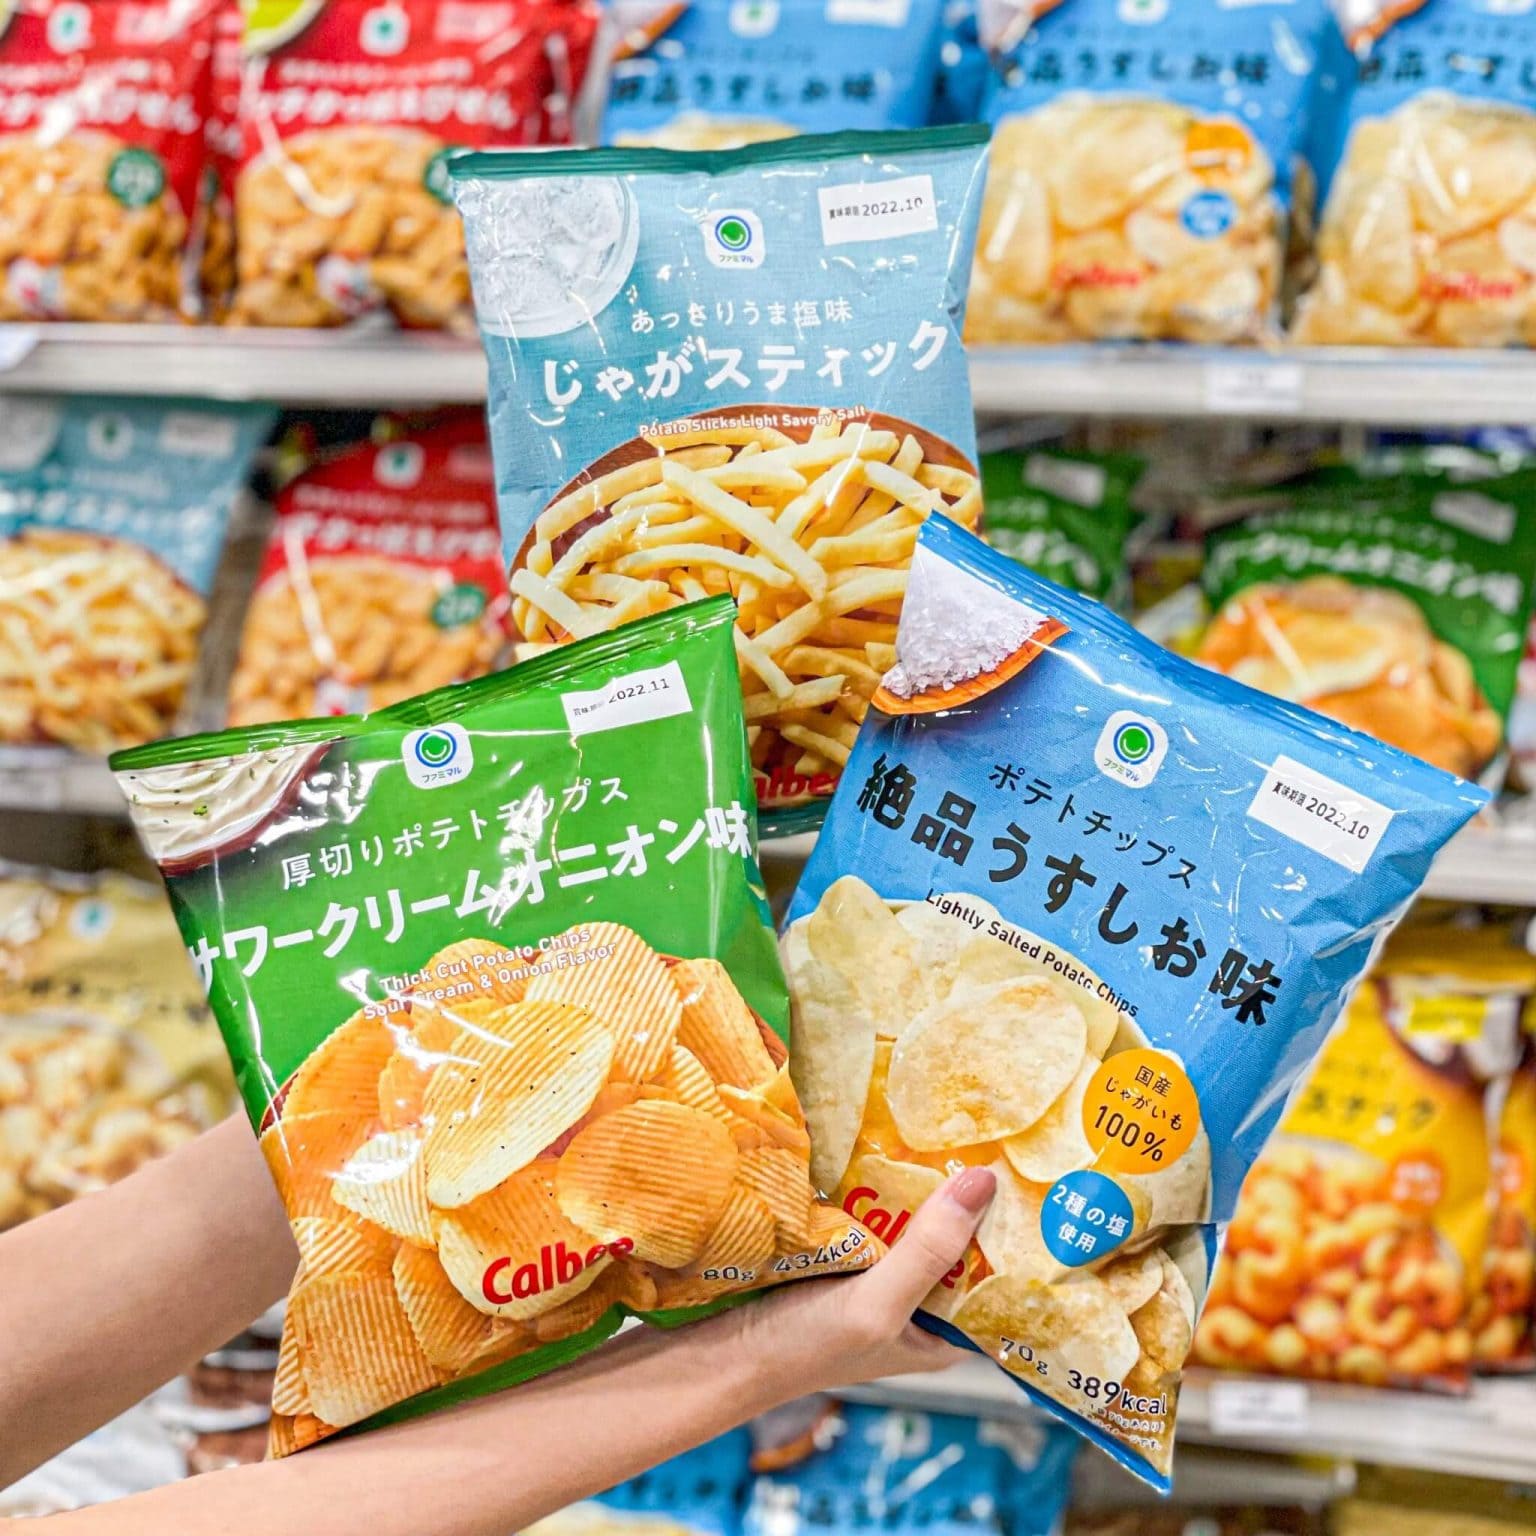 Family Mart - Explore a wide range of local Japanese snacks at Family Mart – who cares if you can’t read what’s on them?